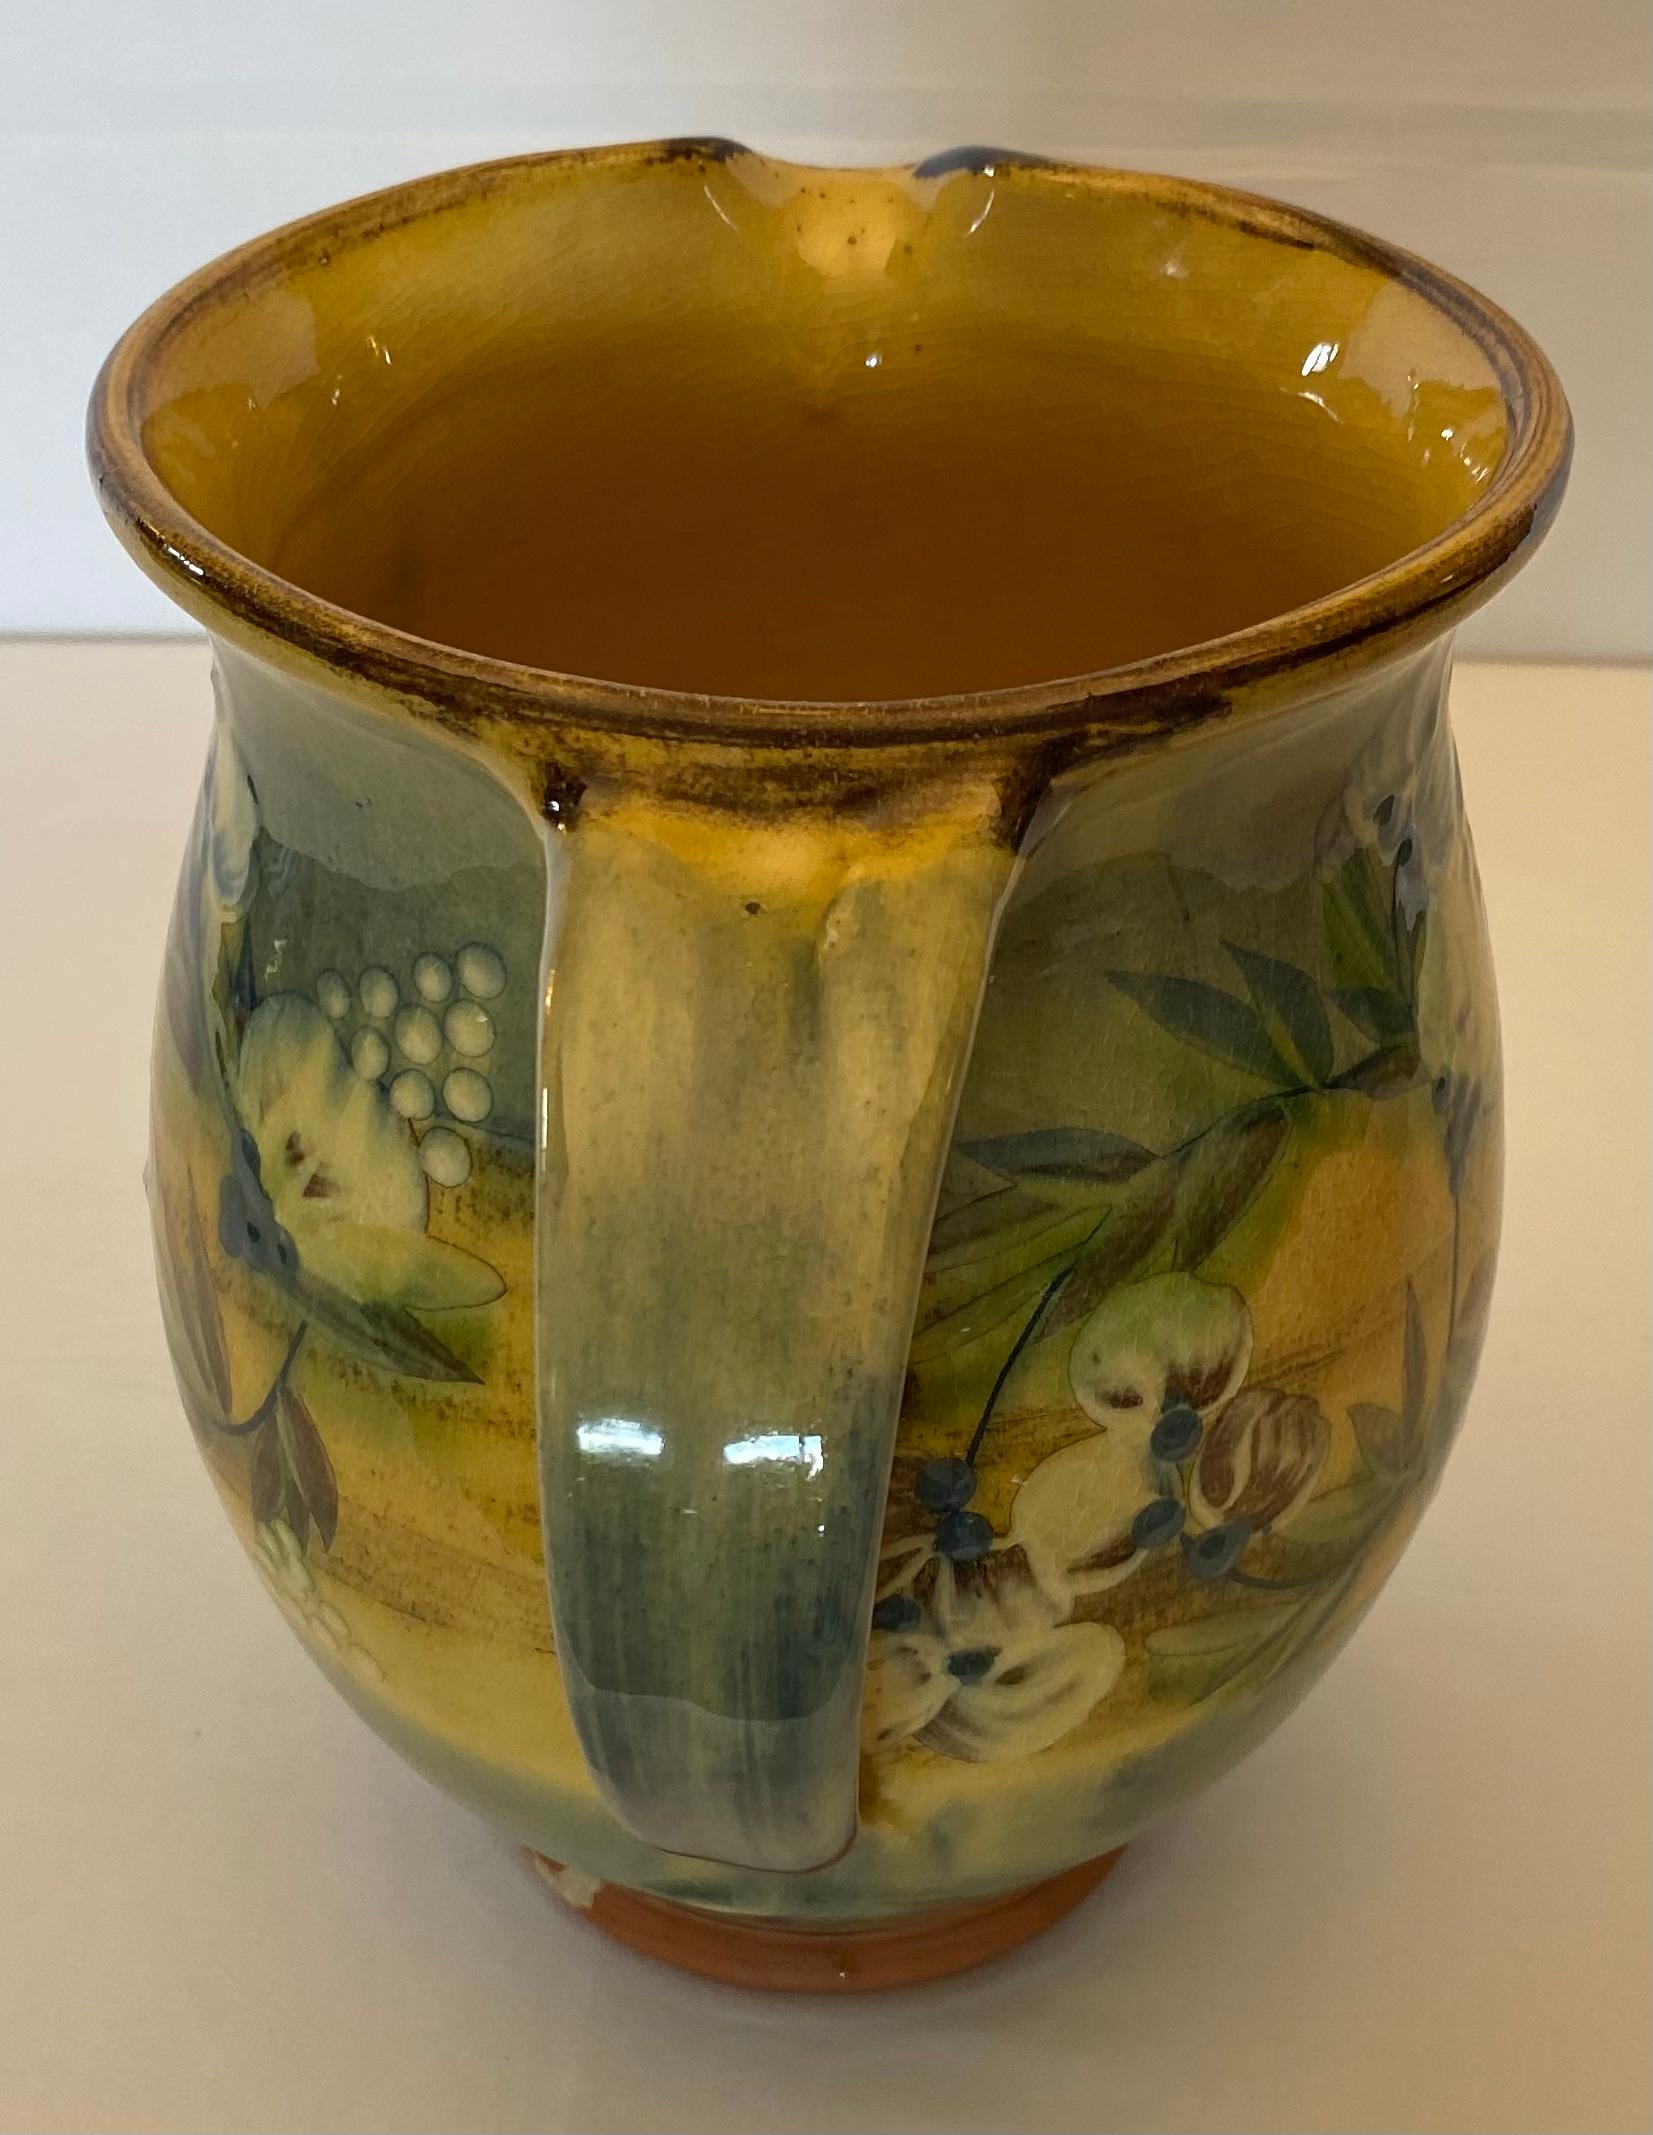 A fine hand-crafted ceramic pitcher vase from the Provence region of France. 

This French ceramic pitcher vase is very well made using clay from the region. Hand-painted then glazed making this piece particularly pleasing to the eye.

This piece